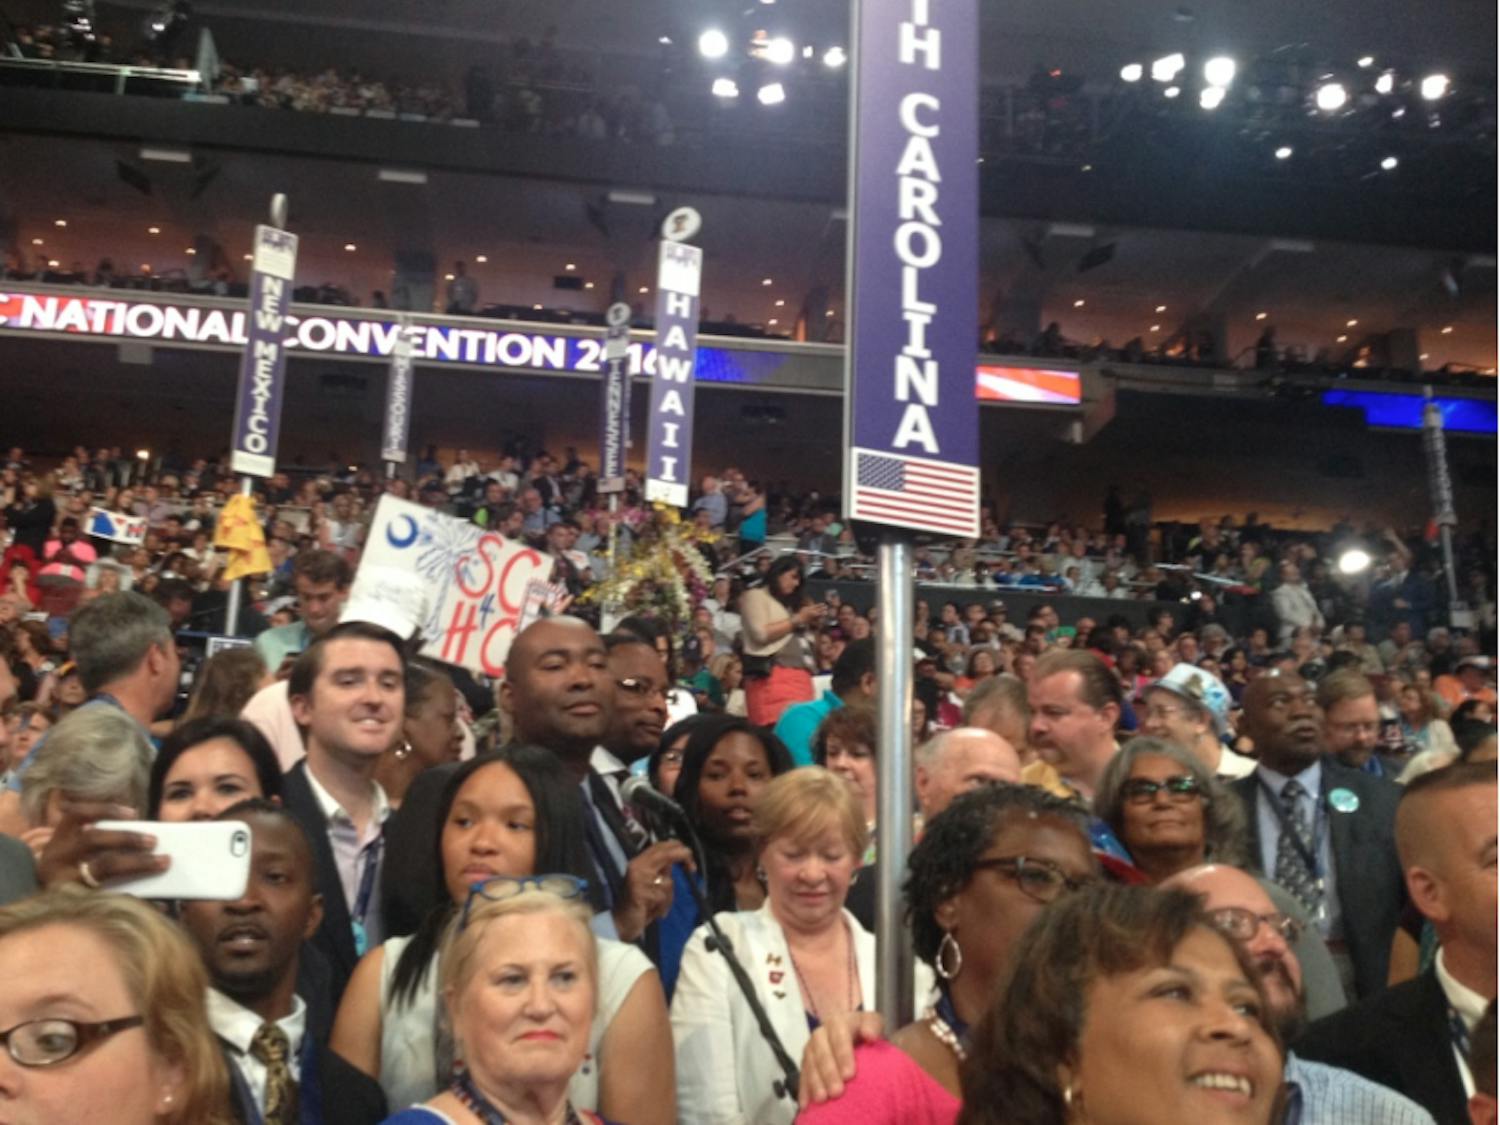 The South Carolina delegation prepares to announce their votes at the Democratic National Convention in Philadelphia on July 26, 2016.